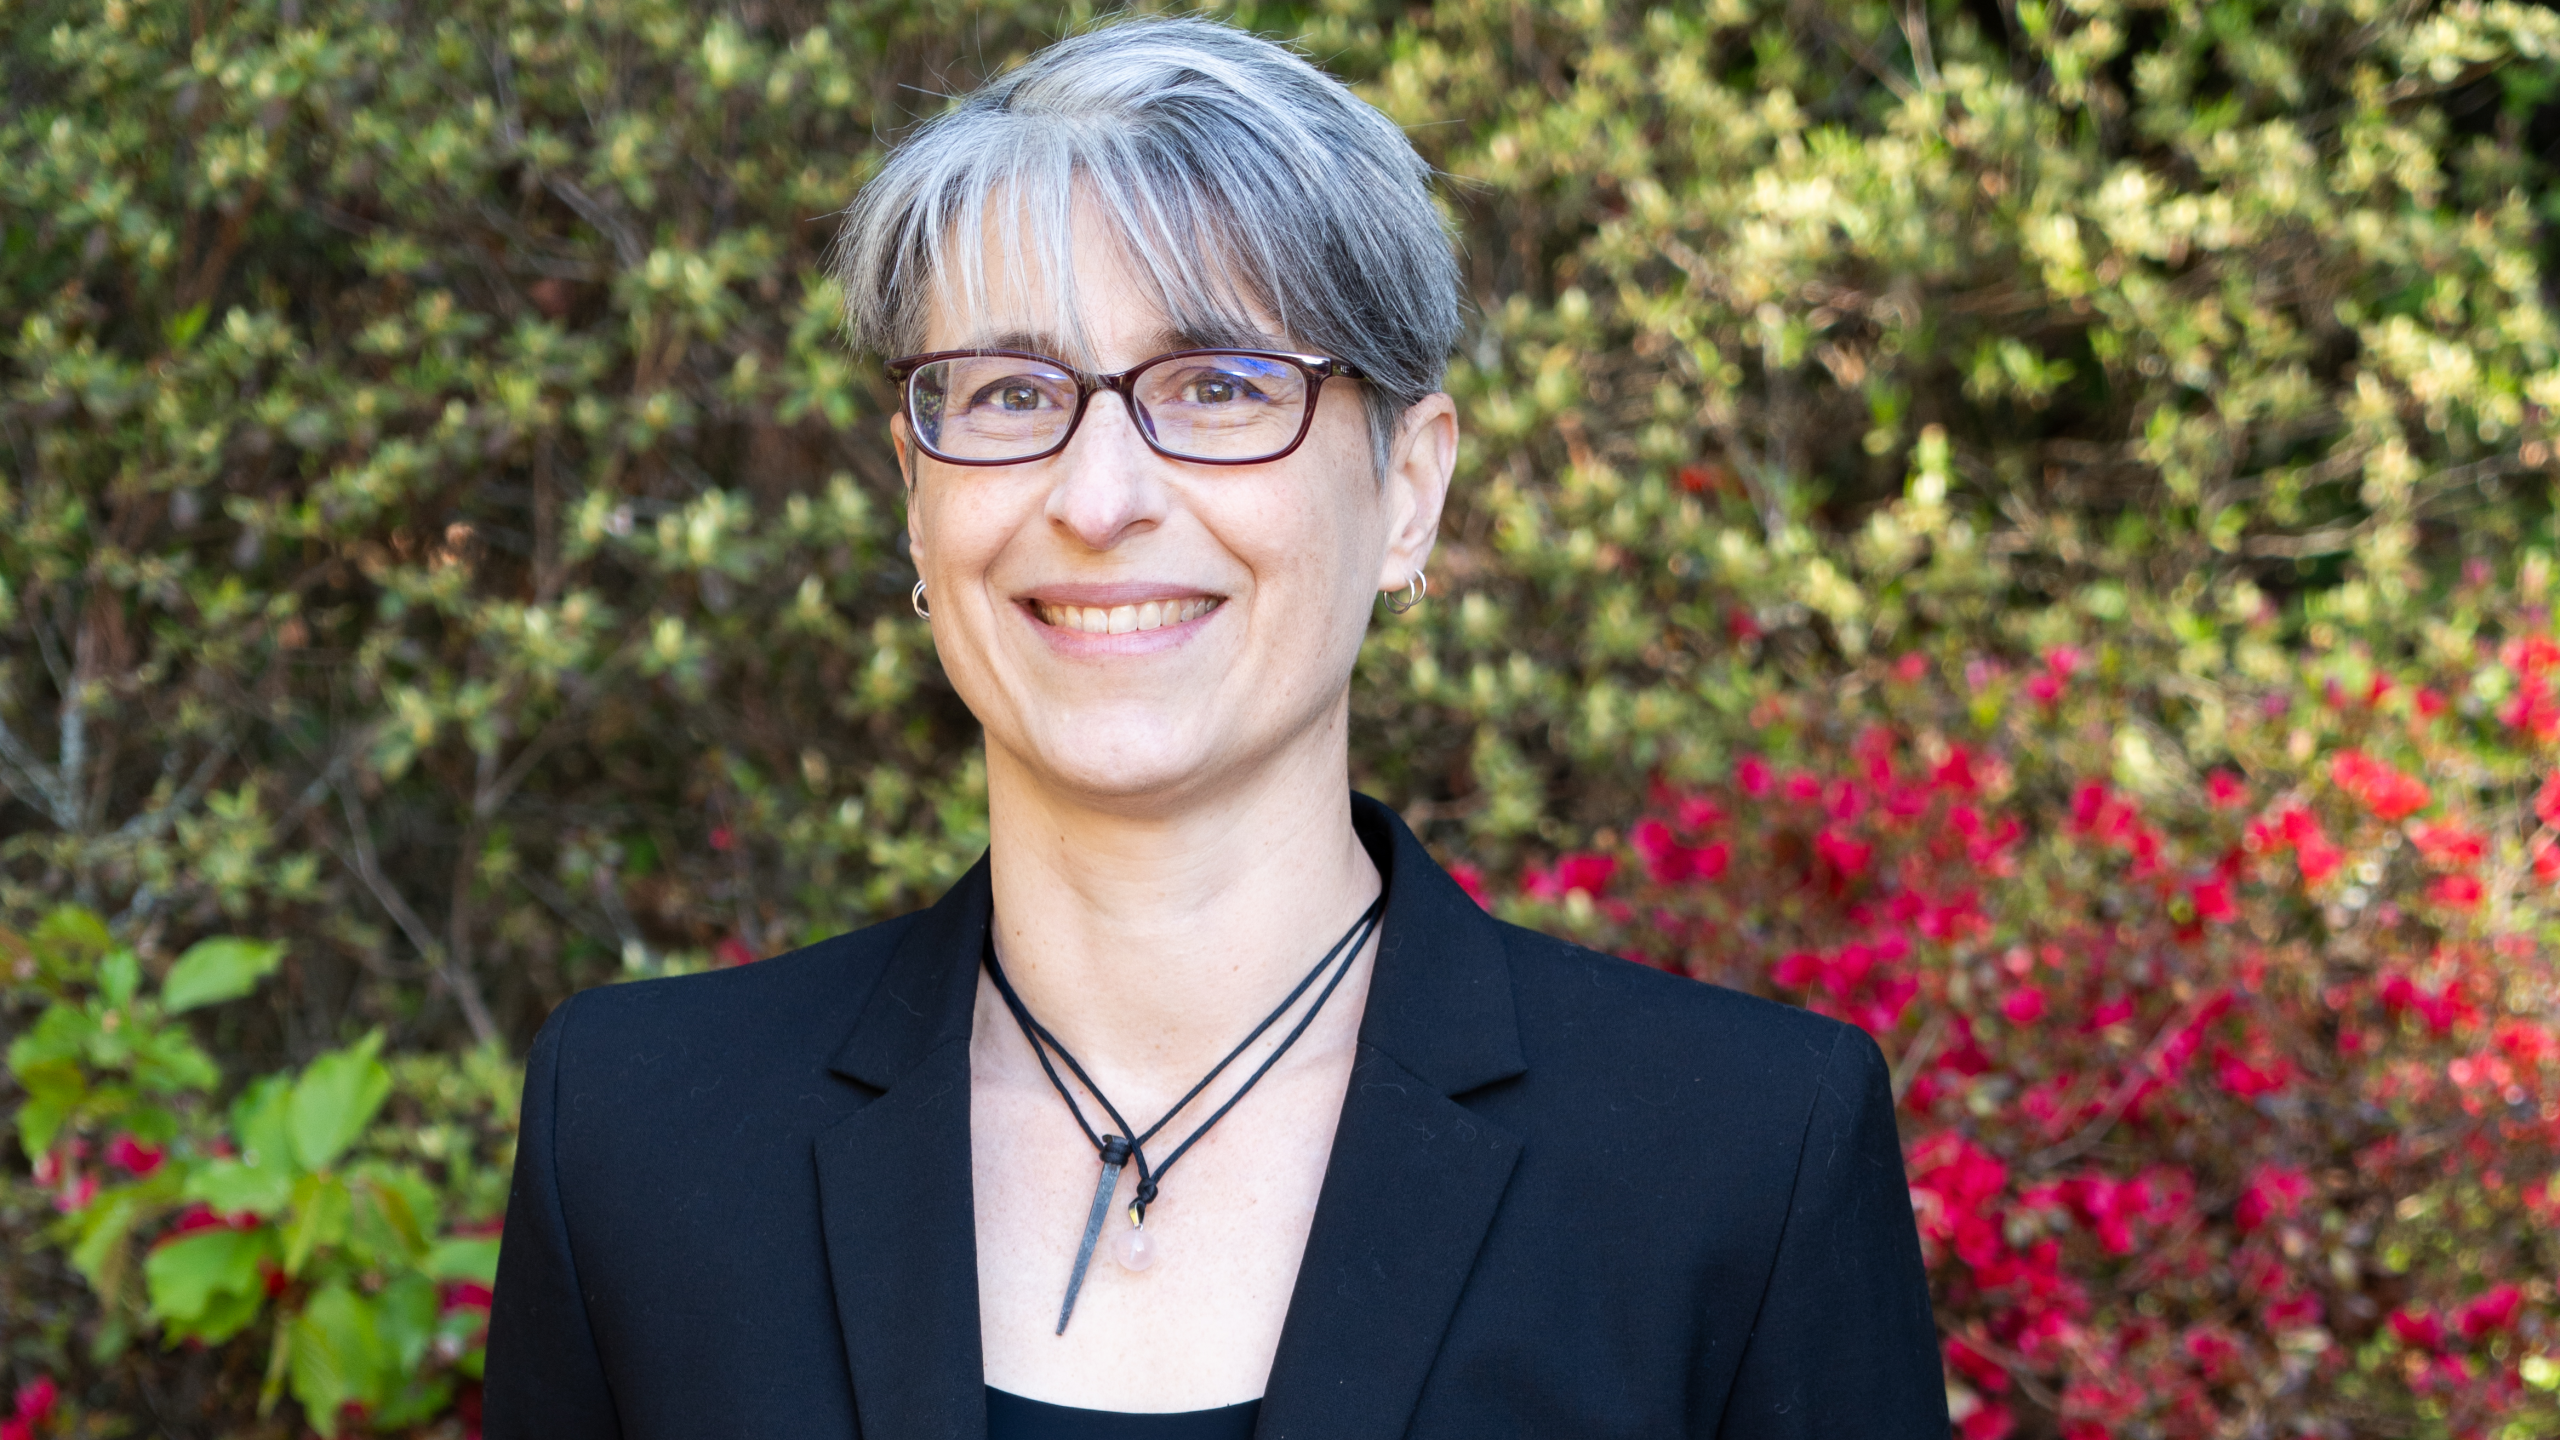 Headshot of Dr Rebecca Carruthers Den Hoed wearing glasses, black suit jacket and a necklace, standing in front of a colorful leafy background.